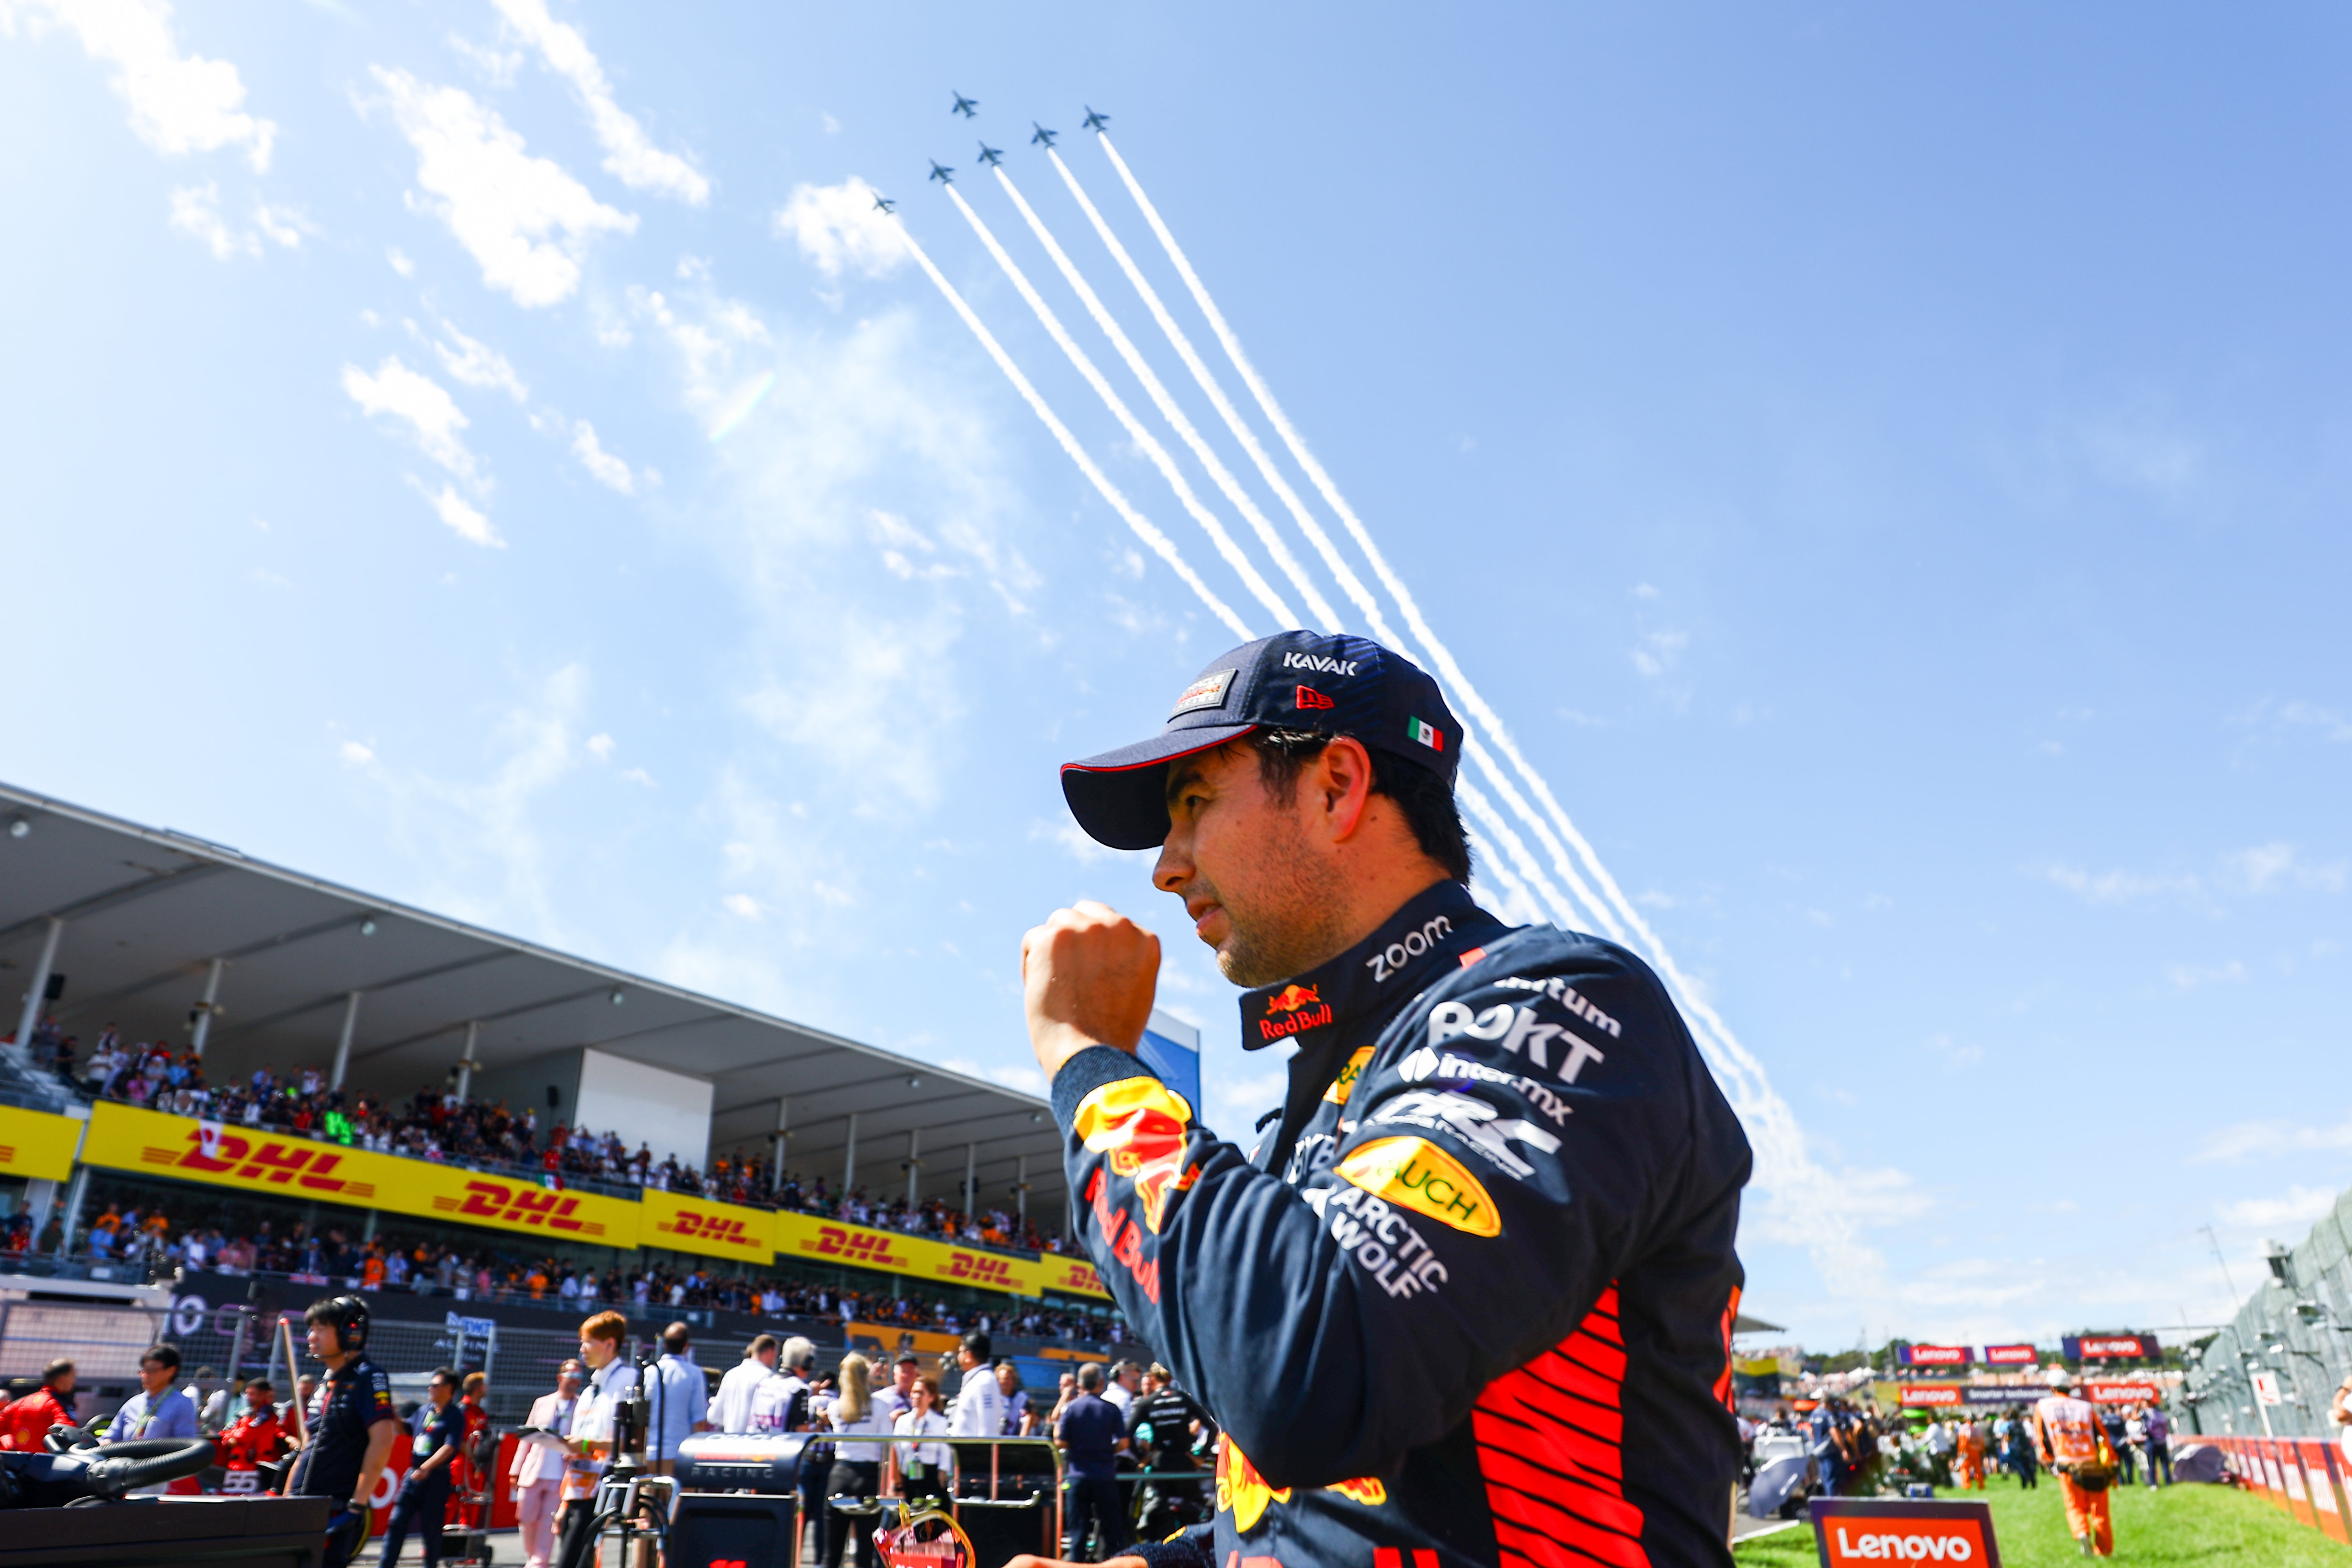 Sergio Perez had a ‘shocker of a race’ in Japan, said Red Bull boss Christian Horner